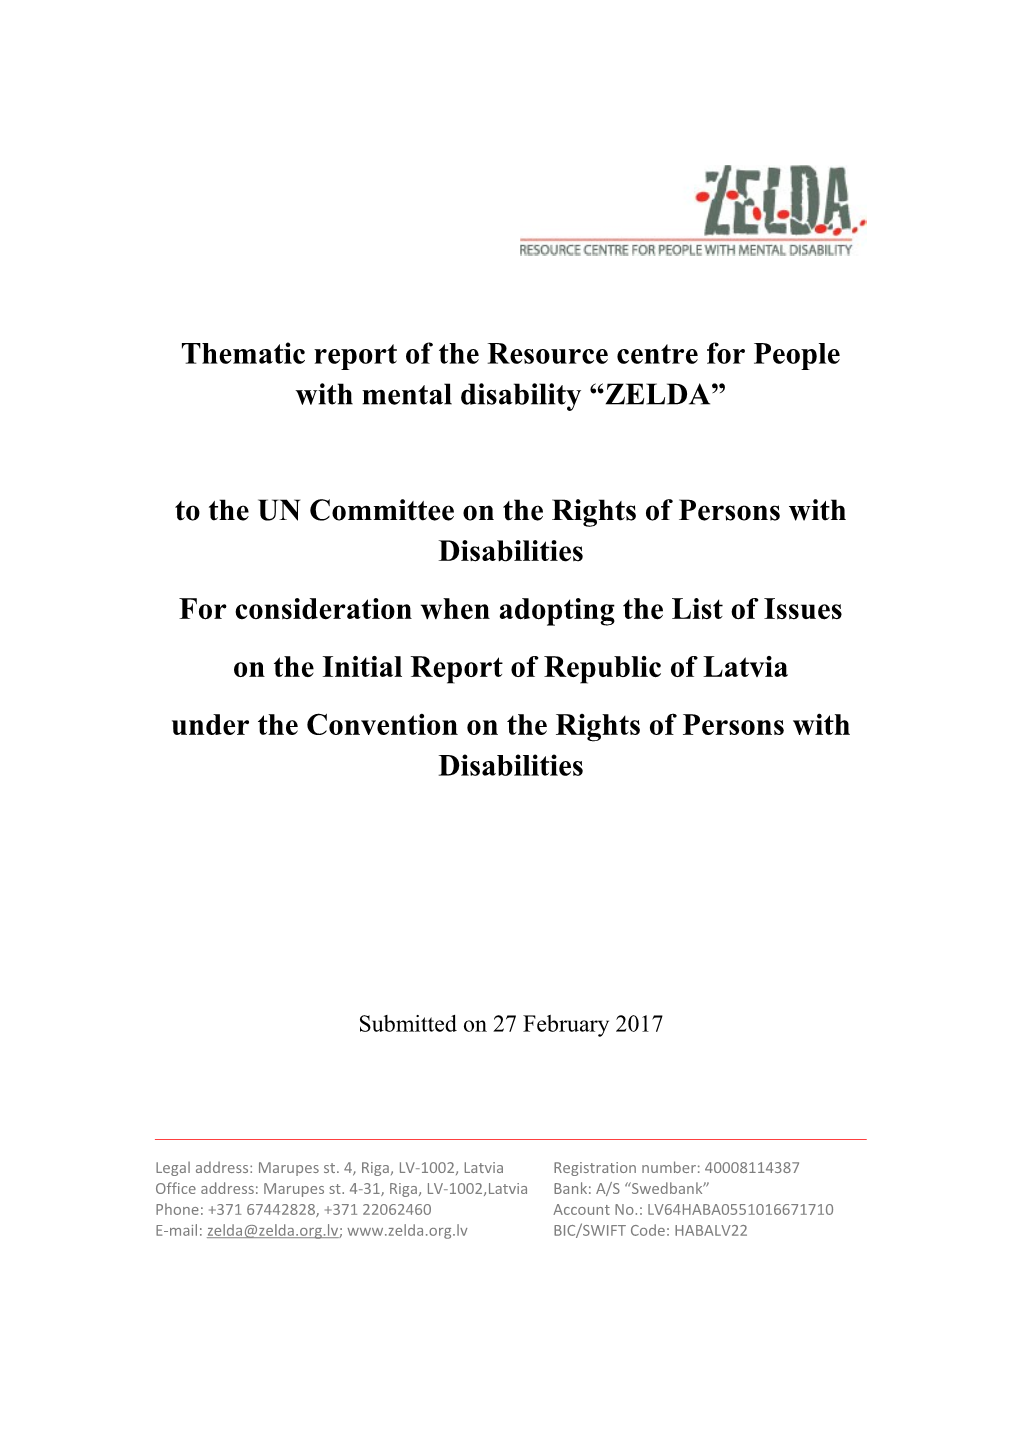 Thematic Report of the Resource Centre for People with Mental Disability ZELDA